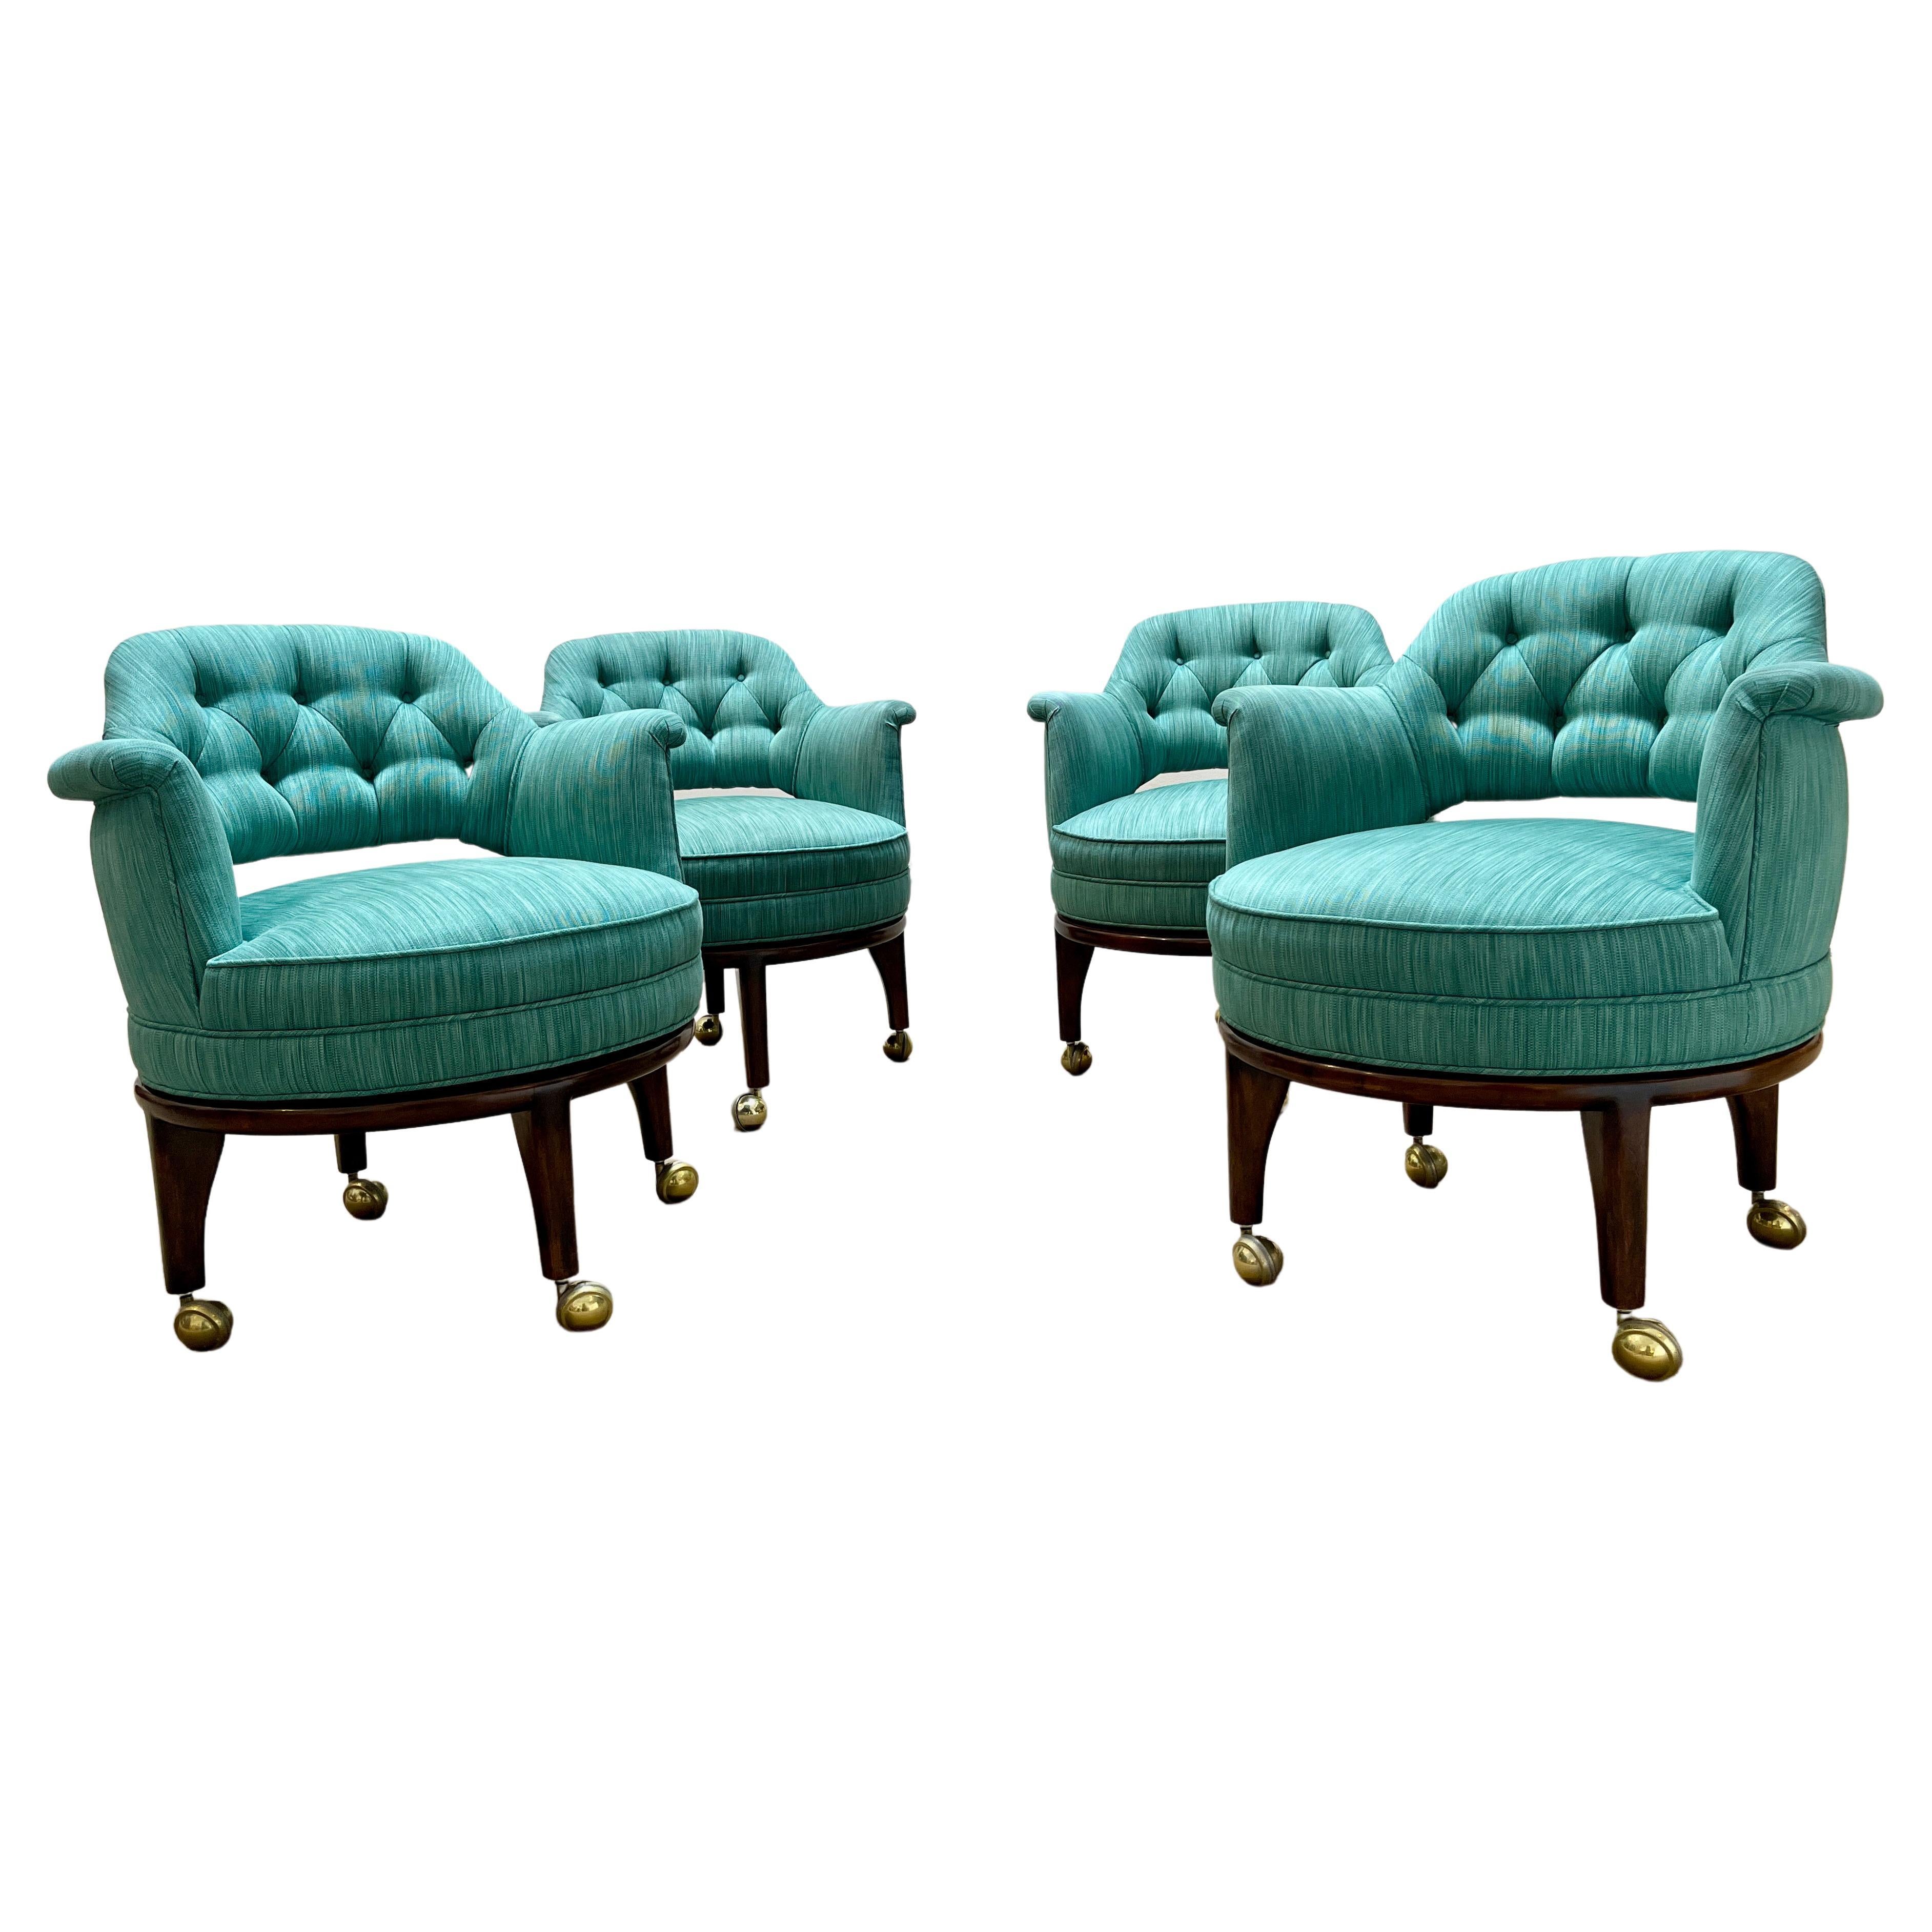 Set of 4 Upholstered Game Chairs